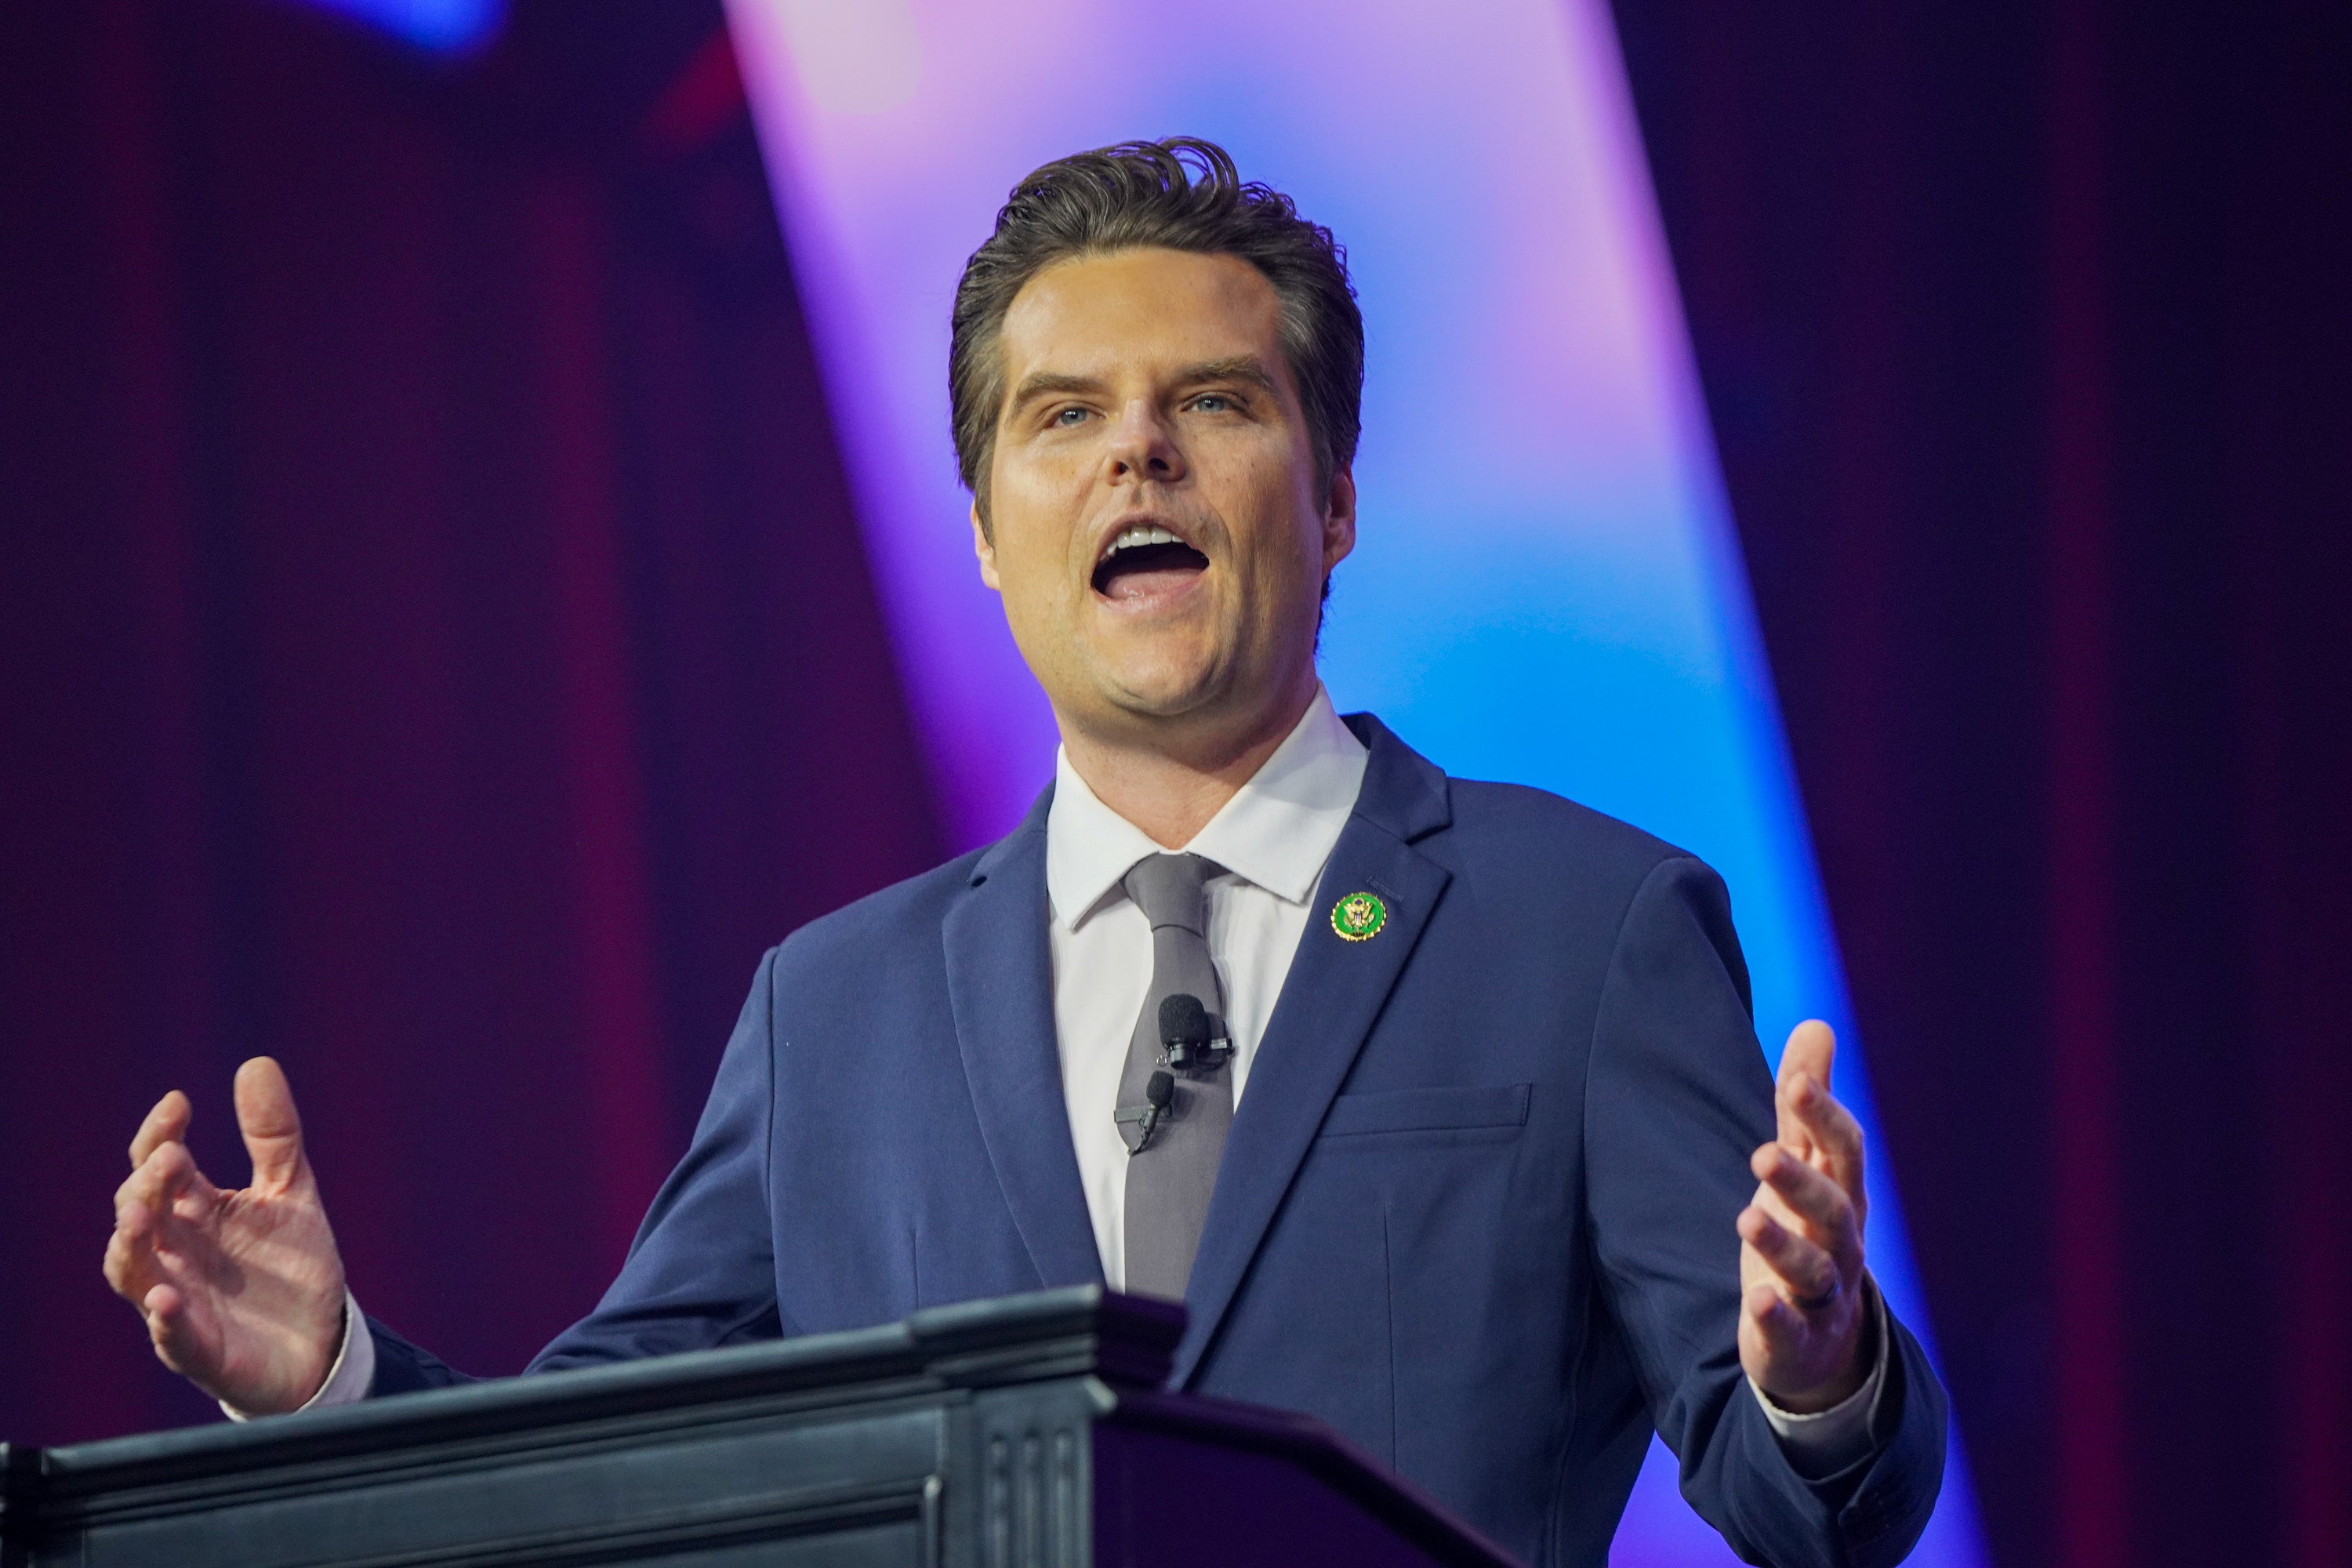 Florida Rep. Matt Gaetz speaks at The People’s Convention, on June 15. A witness has told a House committee that Gaetz paid her for sex, according to a report.